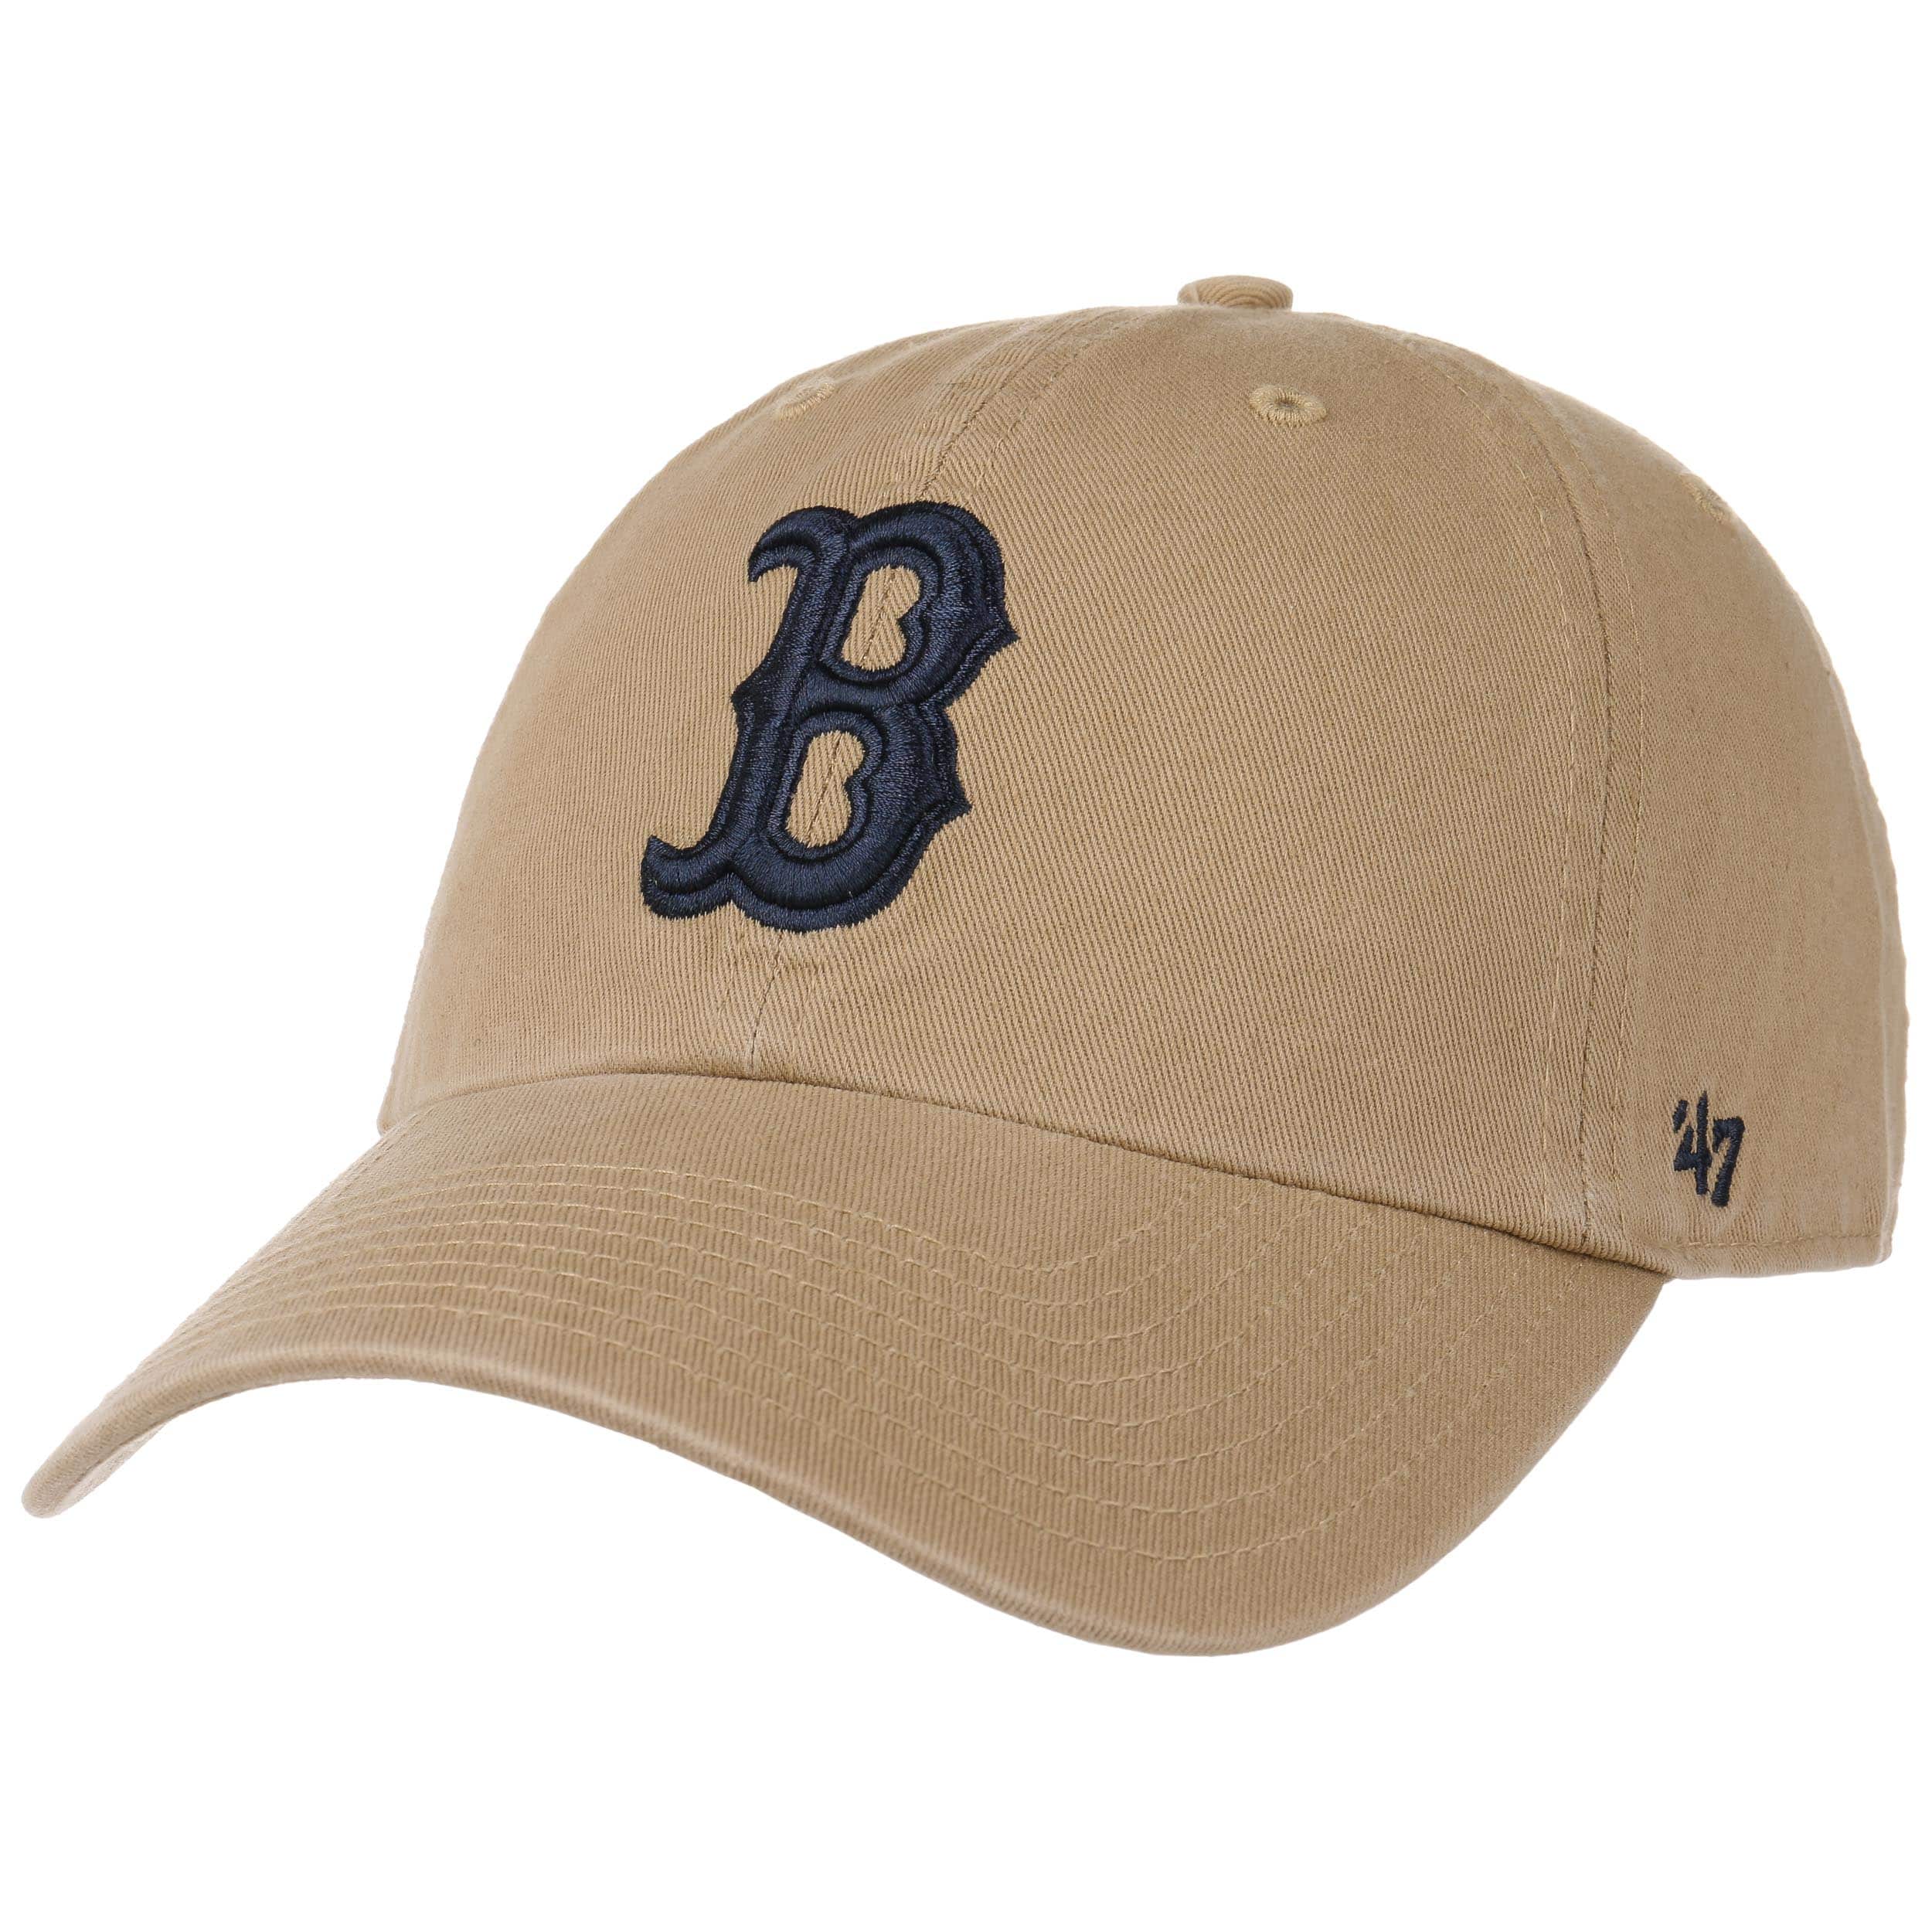 Casquette Clean Up Red Sox by 47 Brand - 24,95 €